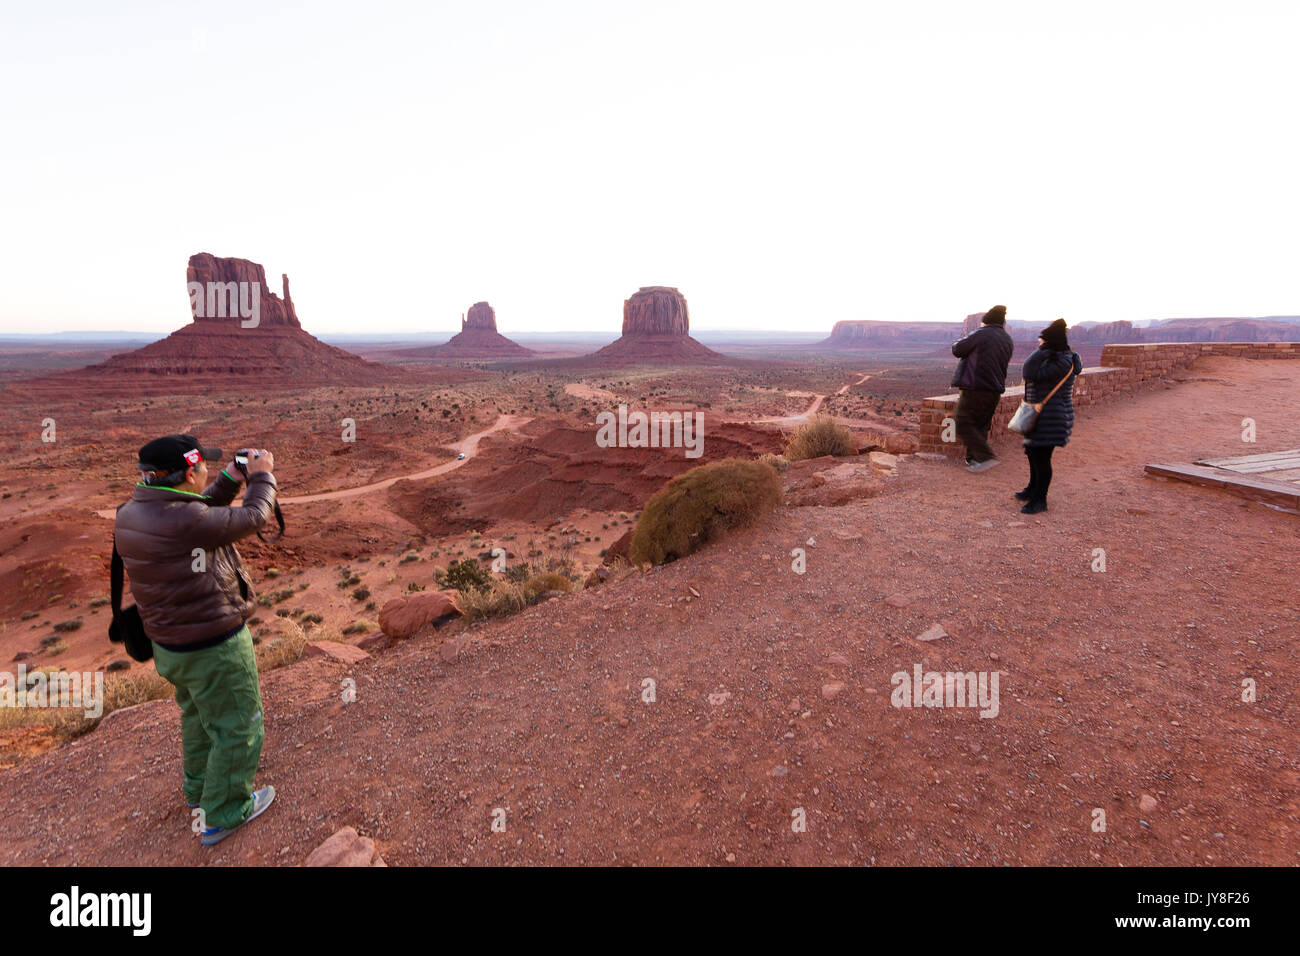 Monument Valley, Utah, USA. An Asian holidaymaker takes a photograph at Monument Valley as the sun begins to rise. Stock Photo